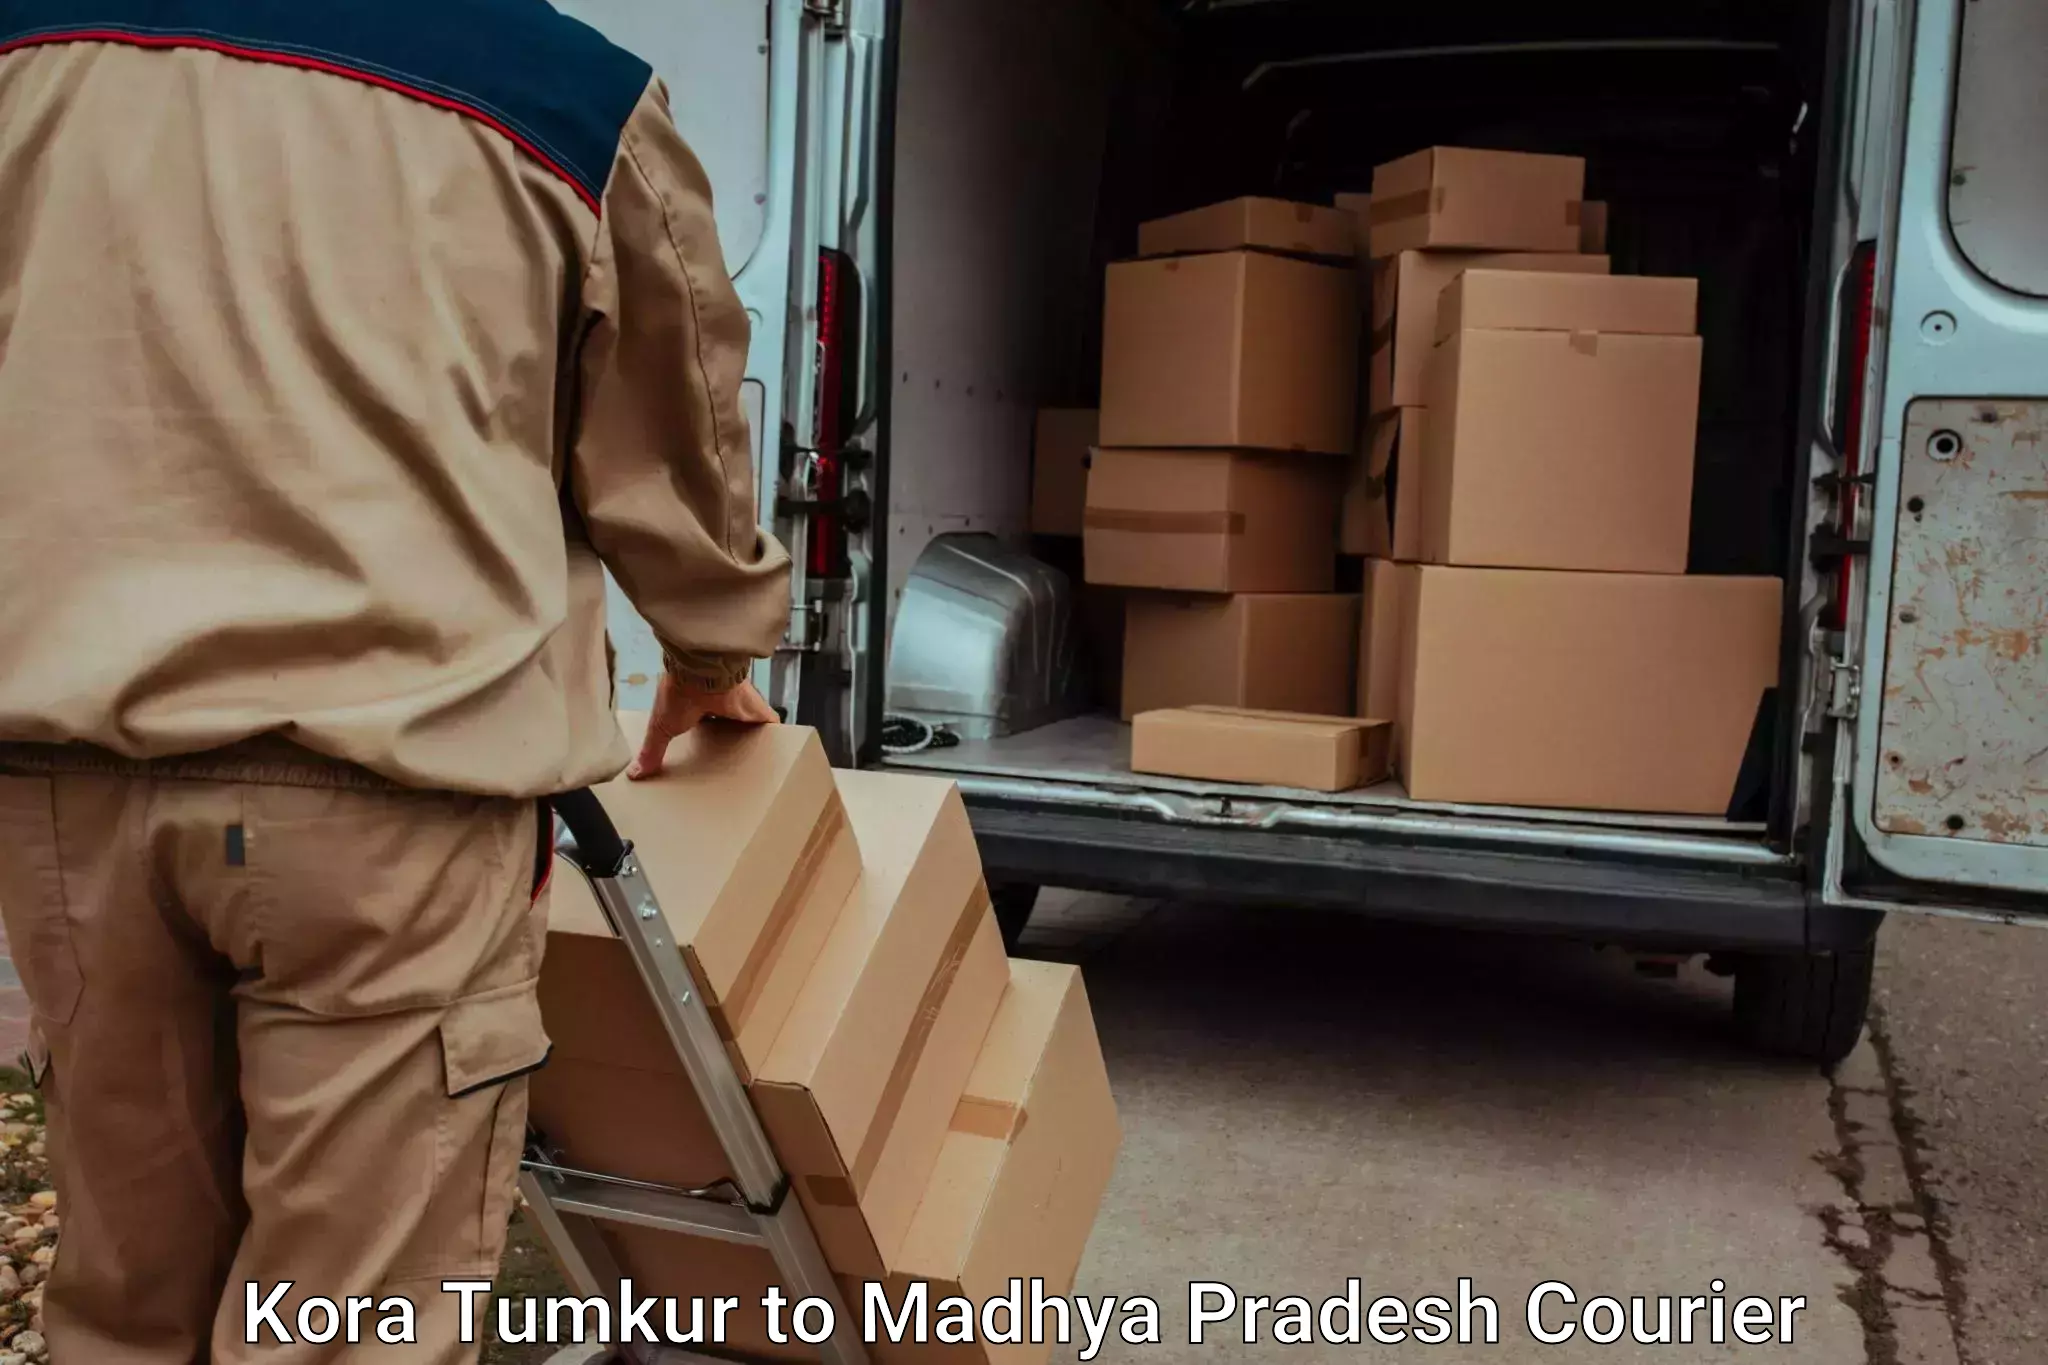 Airport luggage delivery Kora Tumkur to IIIT Bhopal